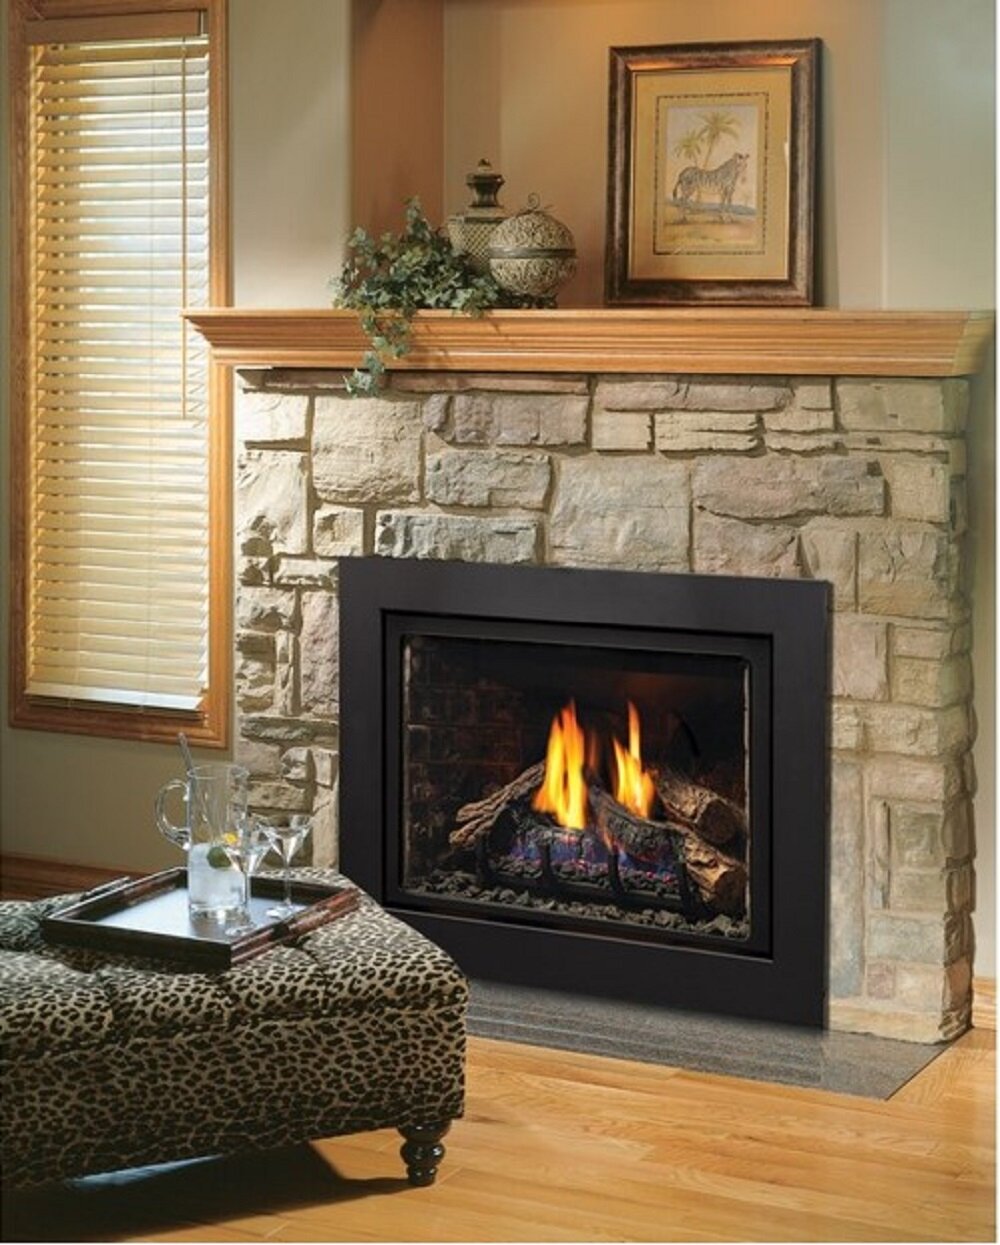 All About Gas Fireplace Inserts Near Me